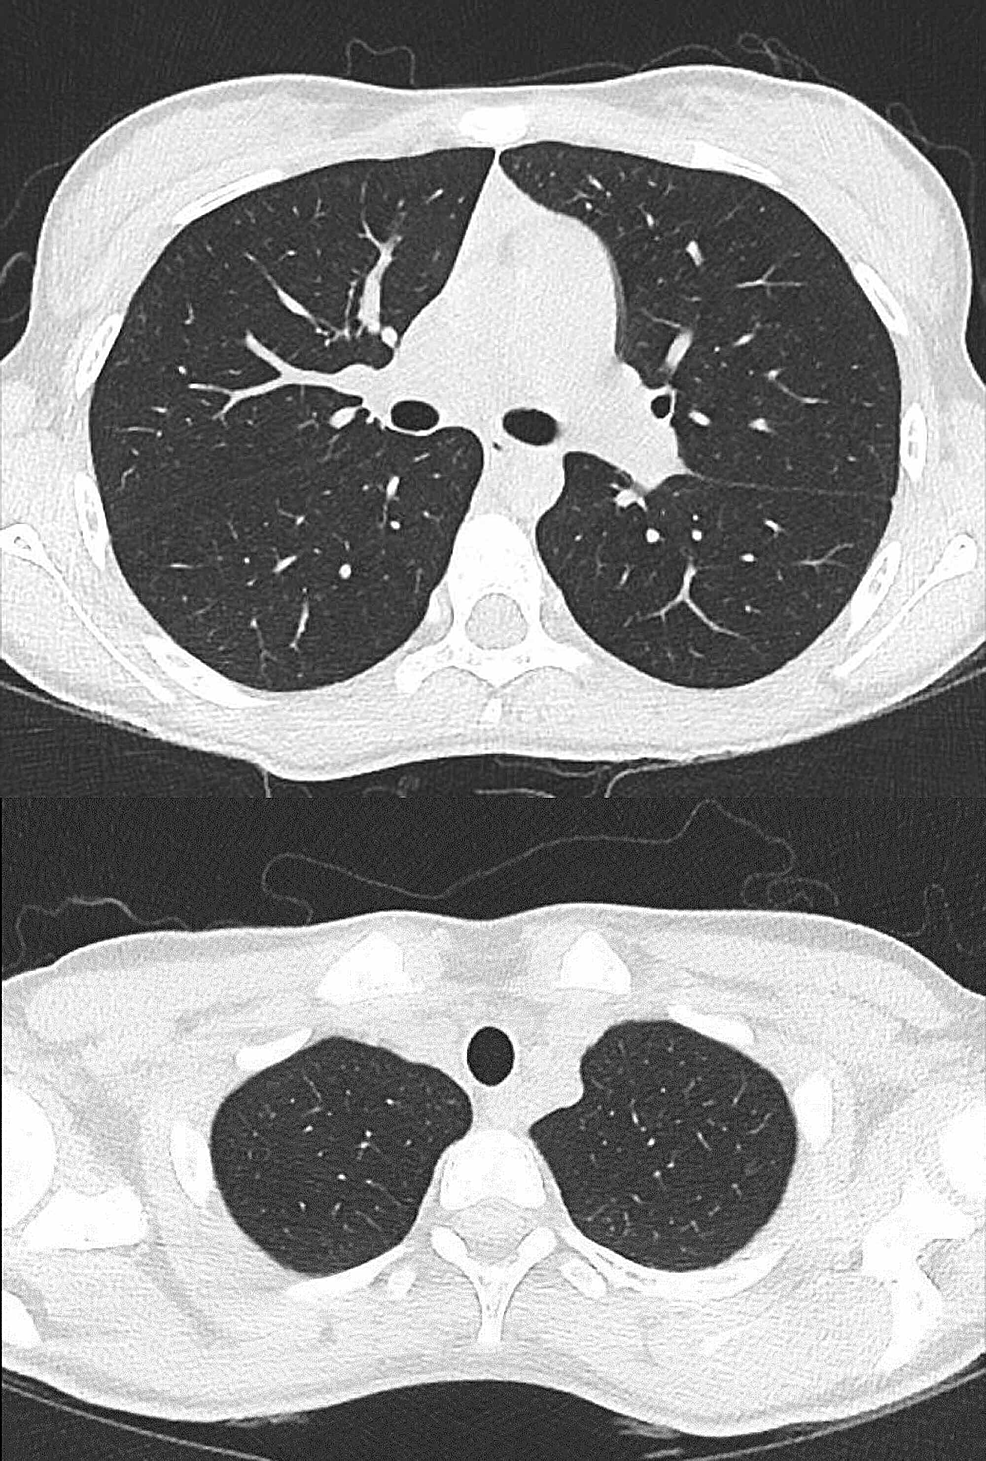 CT-Thorax-showing-resolution-of-the-pneumothorax-and-no-evidence-of-blebs-or-bullae